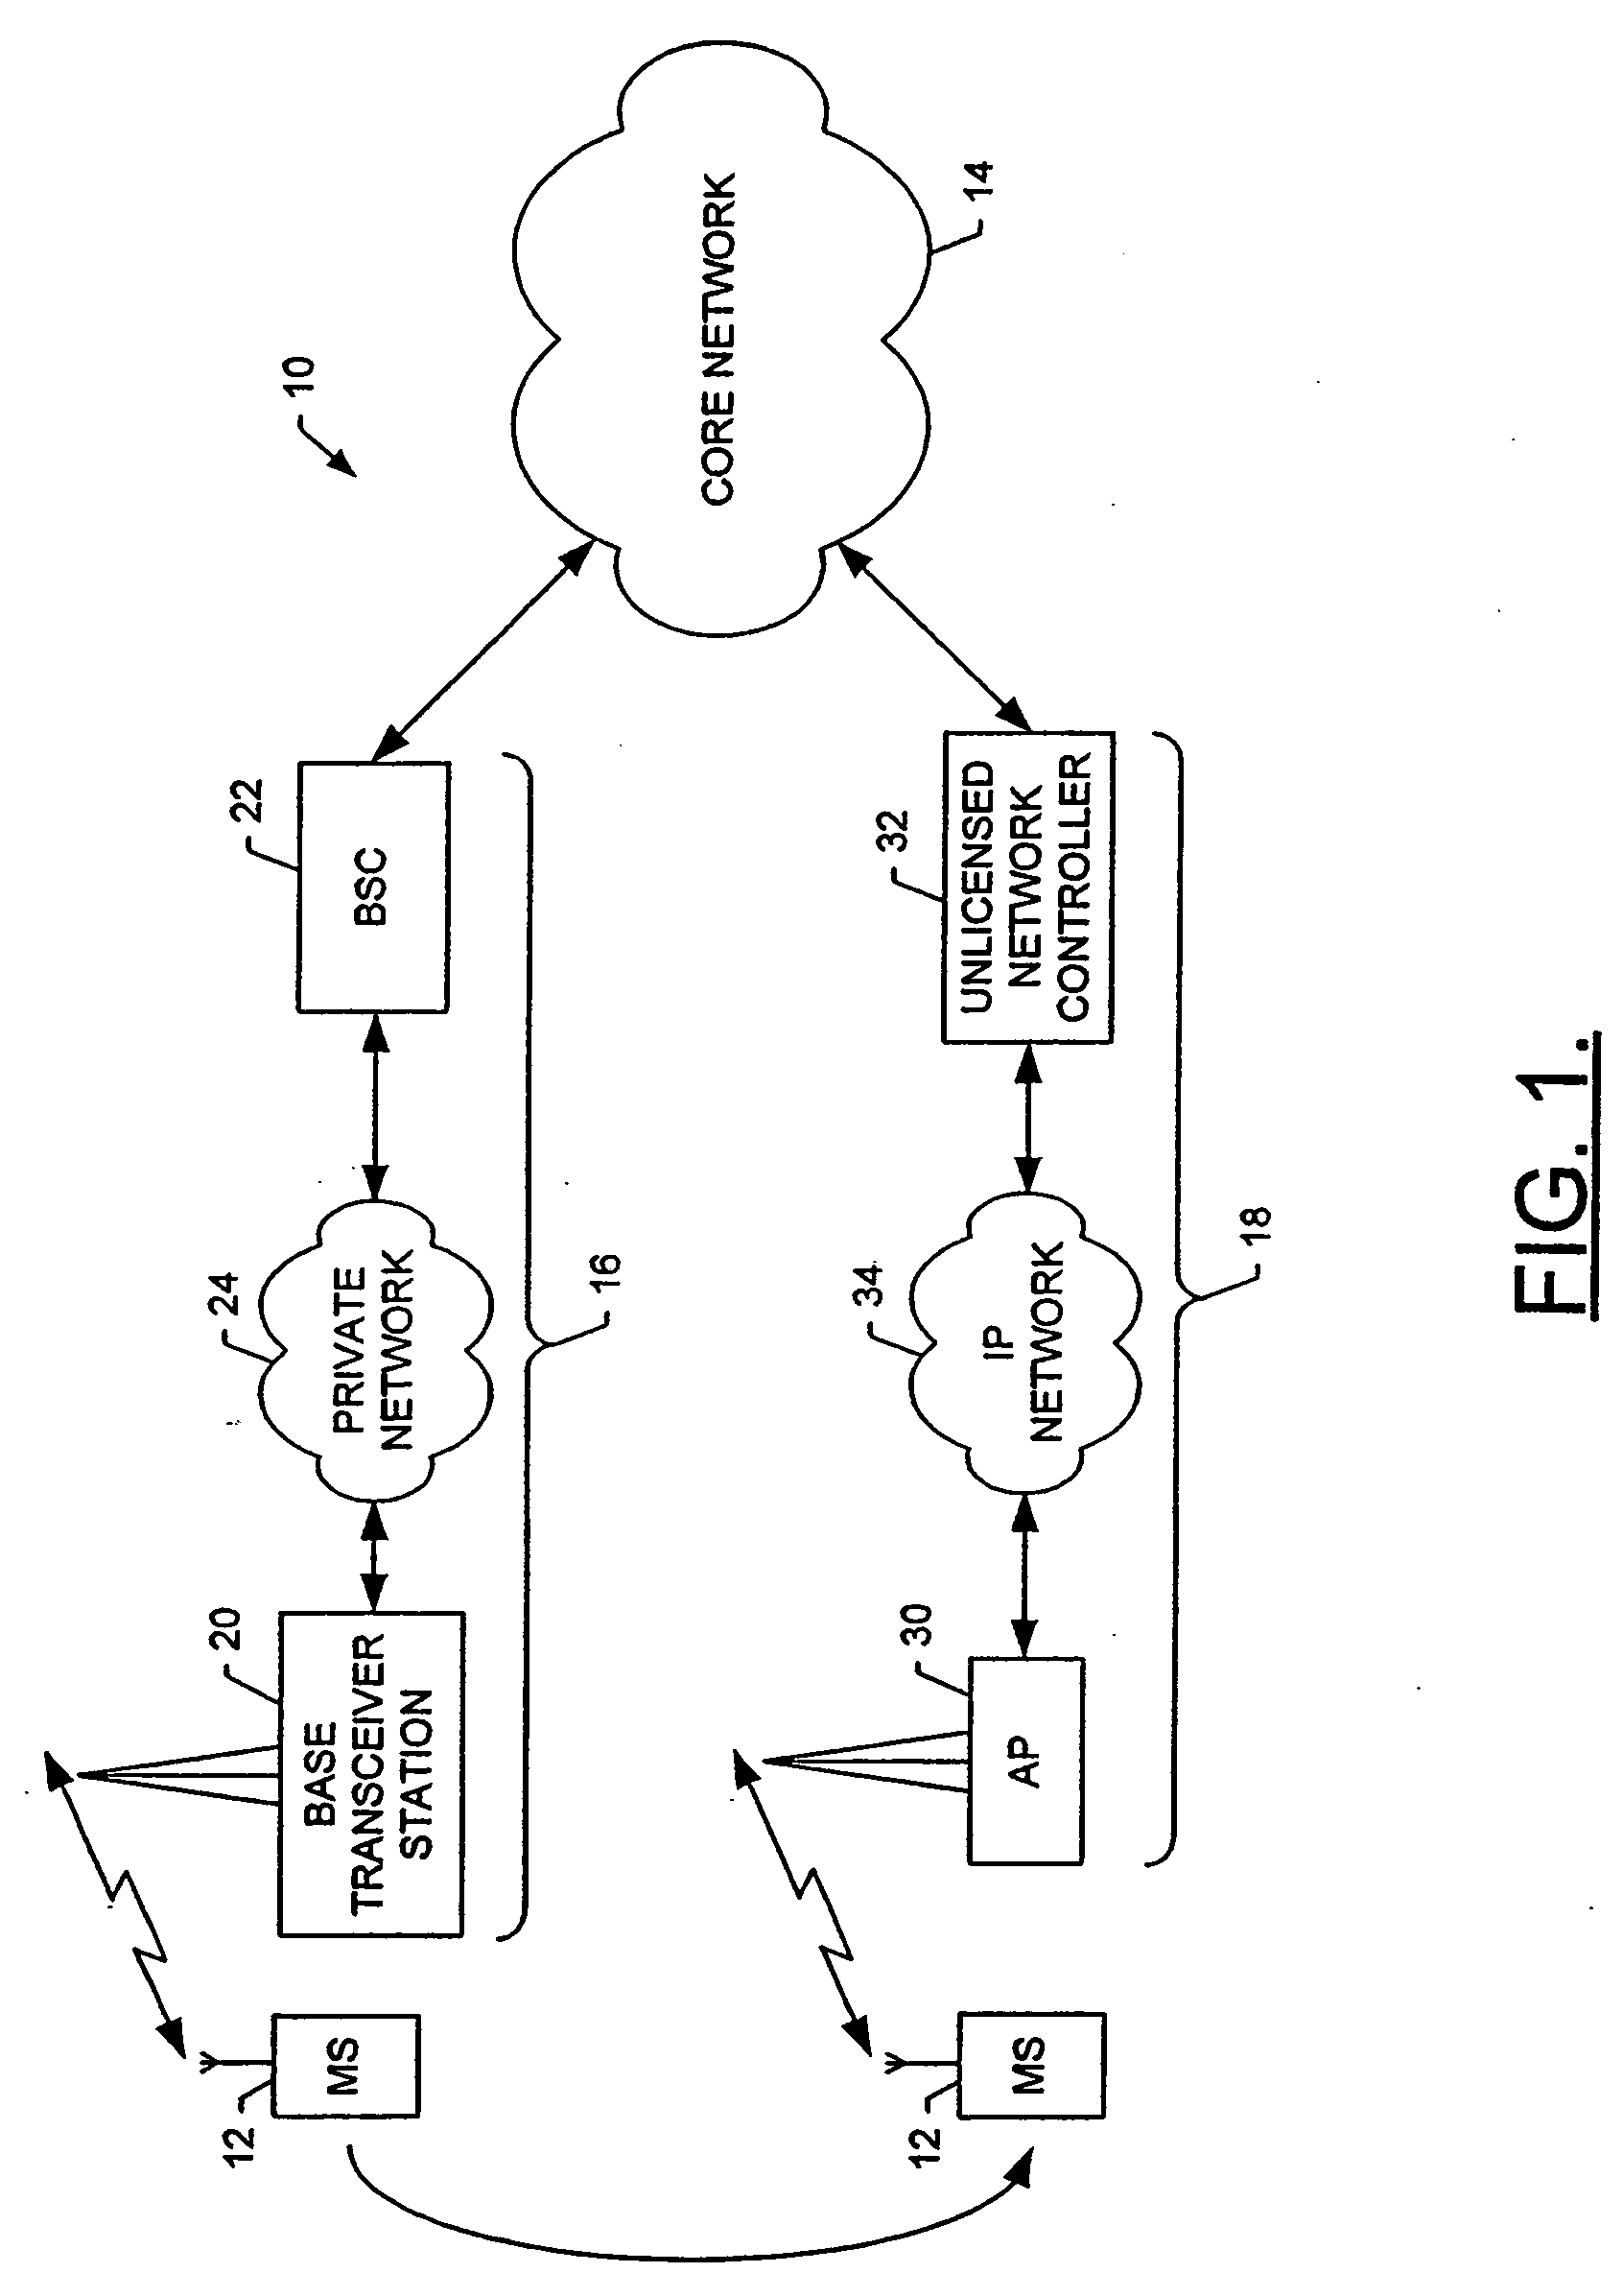 Method, system and mobile station for handing off communications from a cellular radio access network to an unlicensed mobile access network